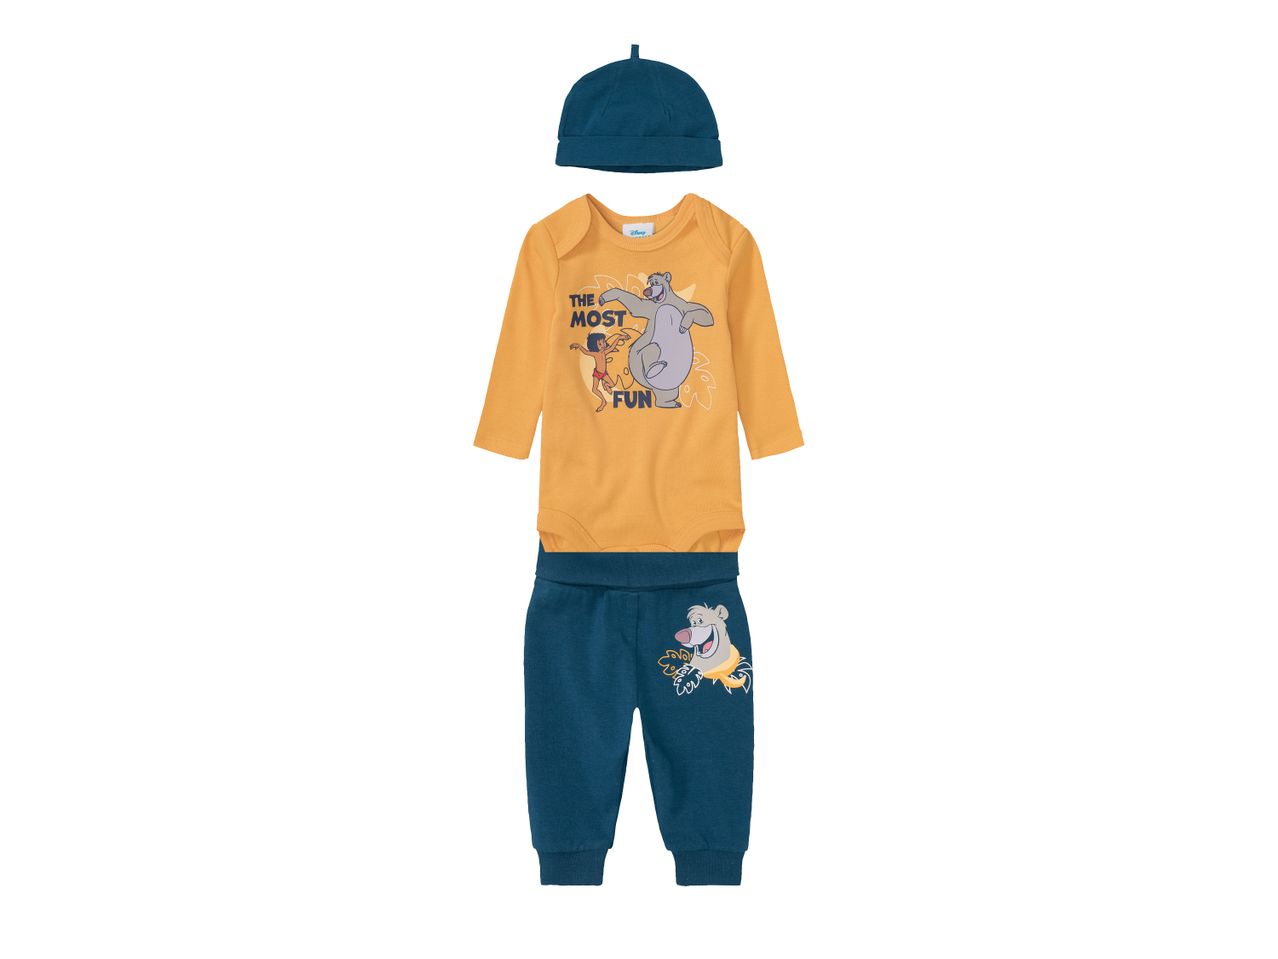 Go to full screen view: Babies’ Outfit “Disney" - Image 1